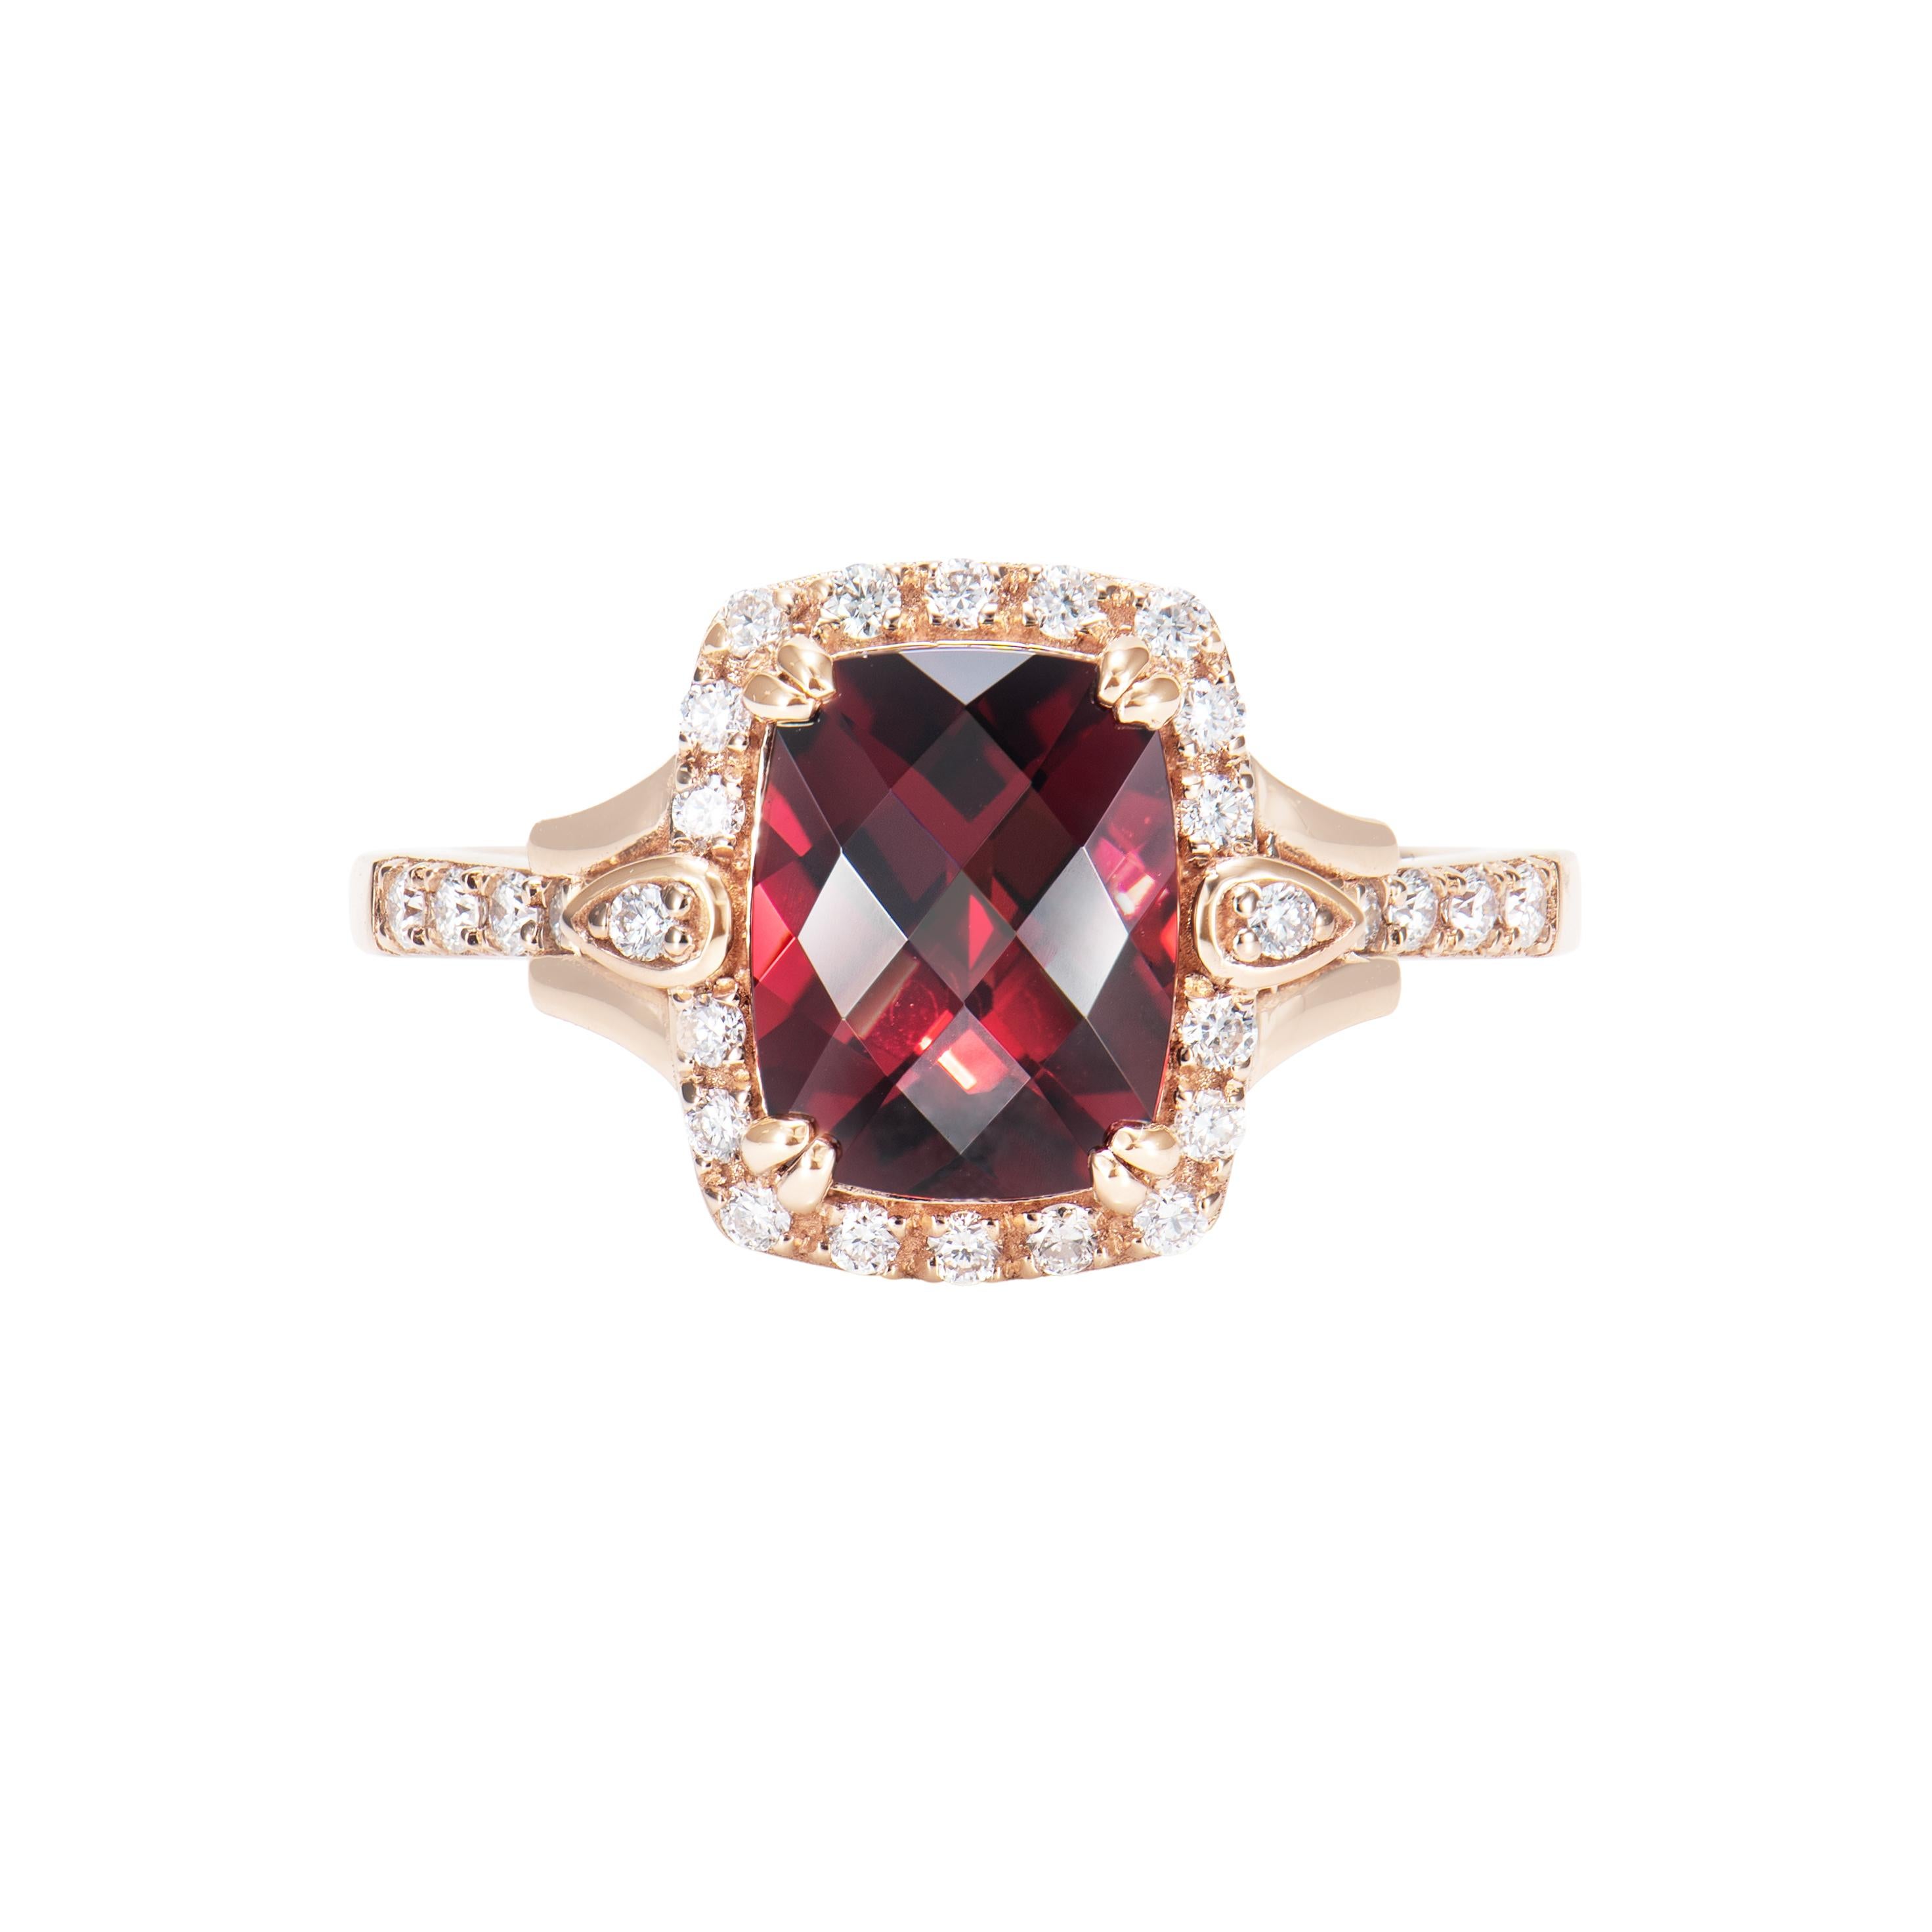 Contemporary 2.54 Carat Rhodolite Cocktail Ring in 18 Karat Rose Gold with Diamond. For Sale